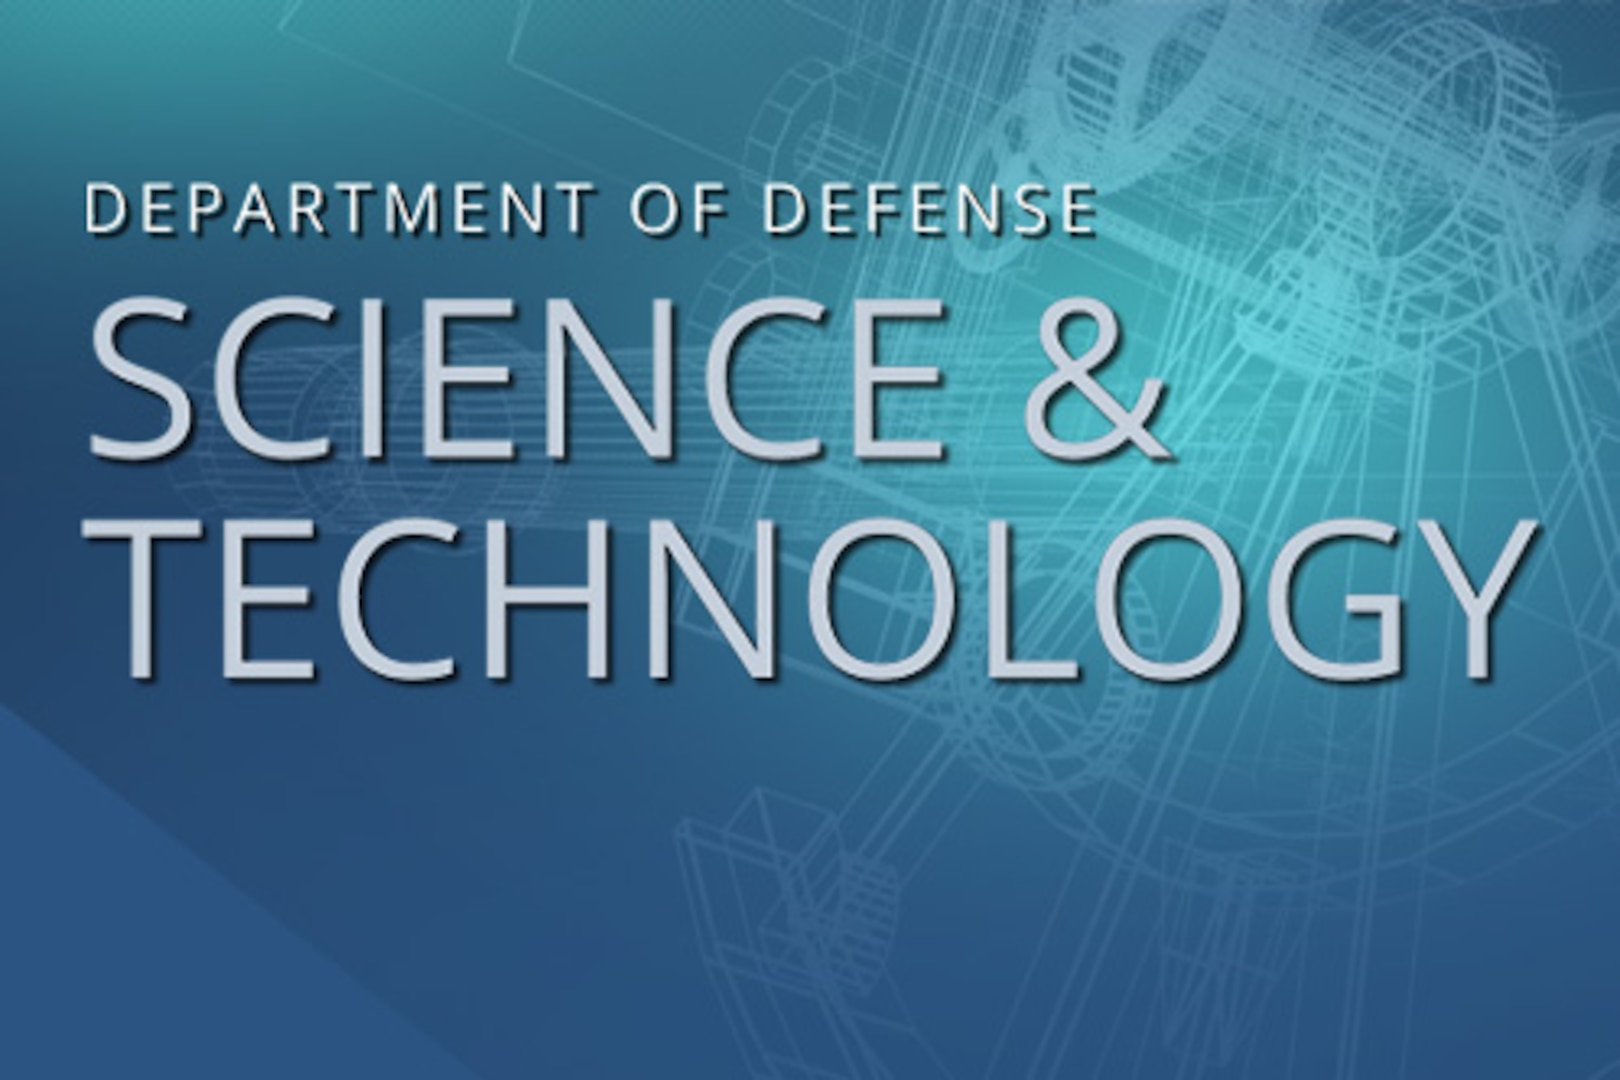 Given today's globalized access to knowledge and the rapid pace of technology development, innovation, speed, and agility have taken on a greater importance. The Department of Defense serves as an innovative leader in developing technology to protect Americans and troops – on and off the battlefield.